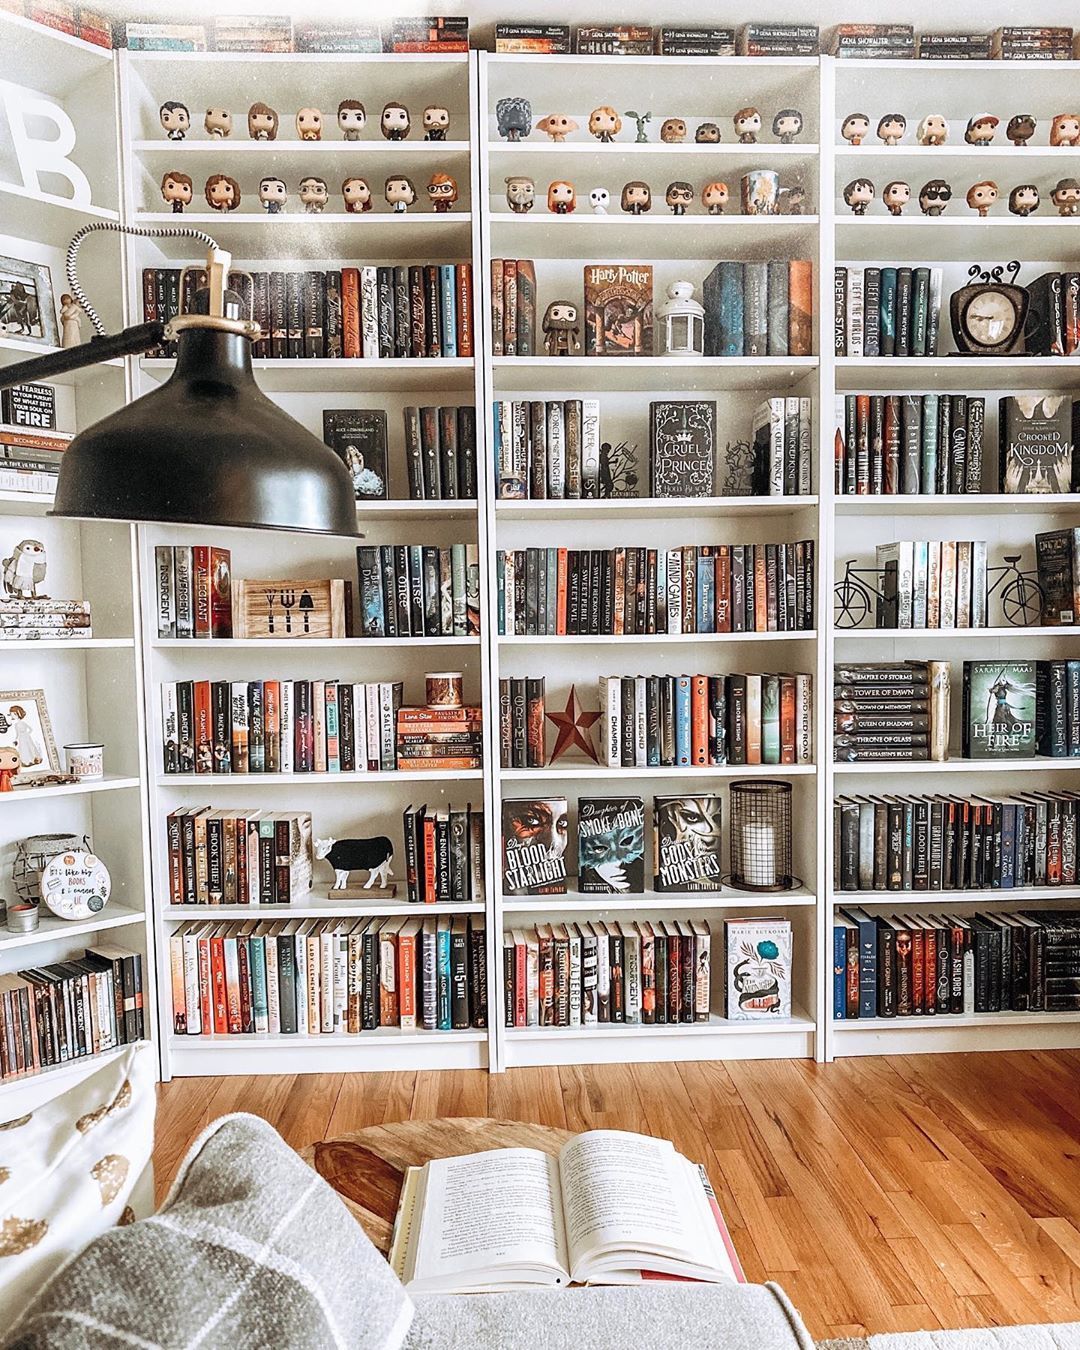 Factors To Consider When Buying A Bookshelf